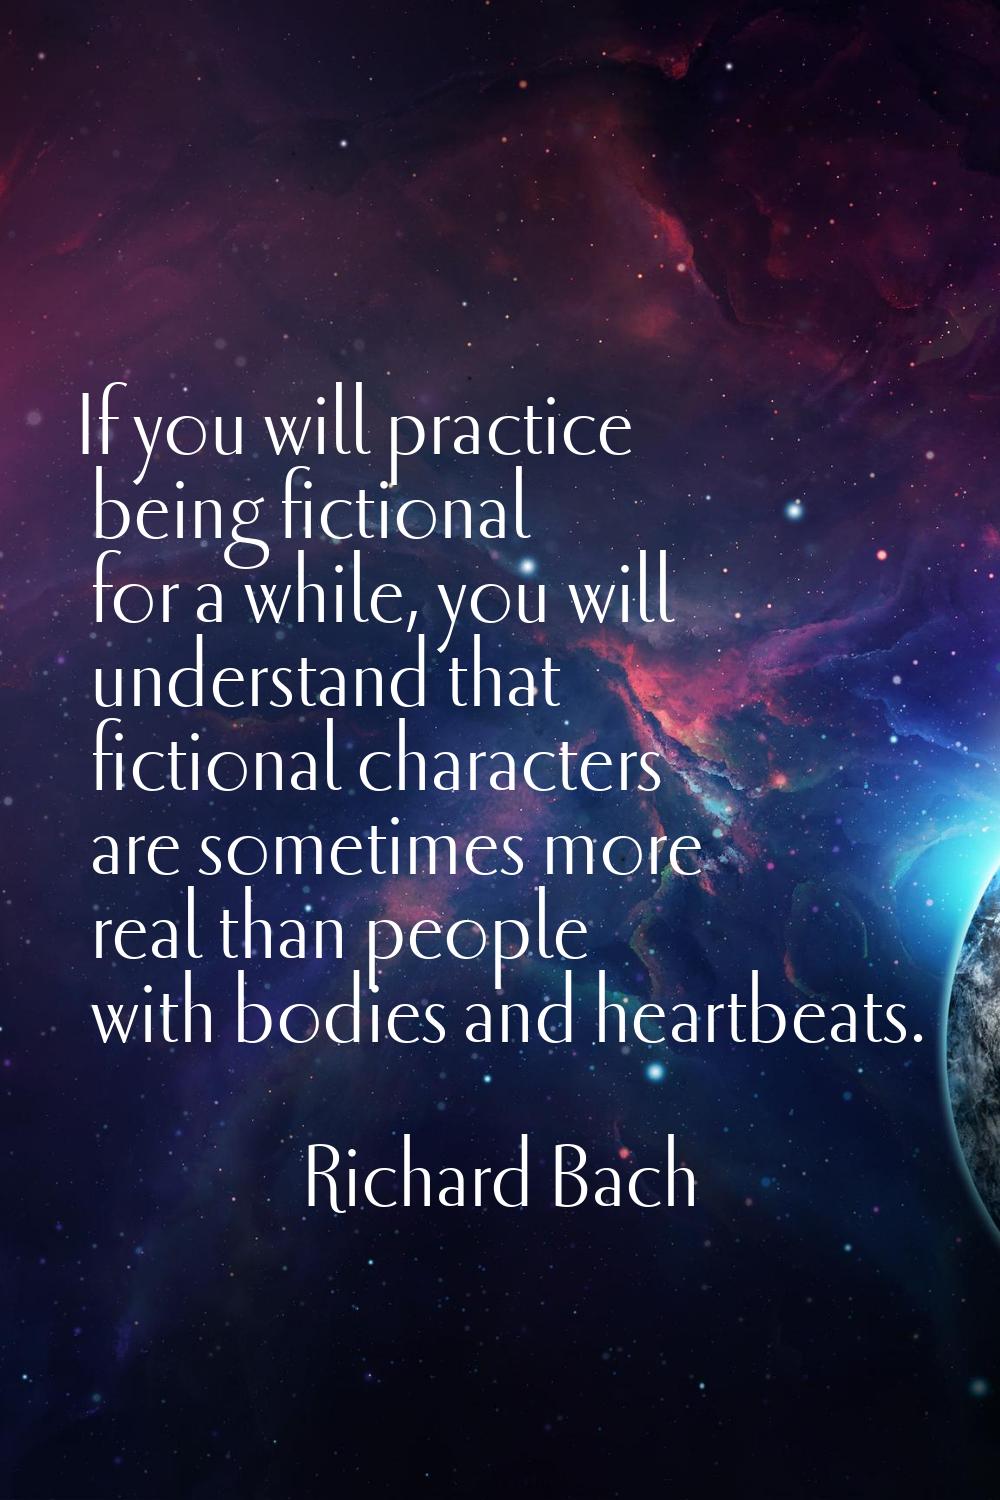 If you will practice being fictional for a while, you will understand that fictional characters are